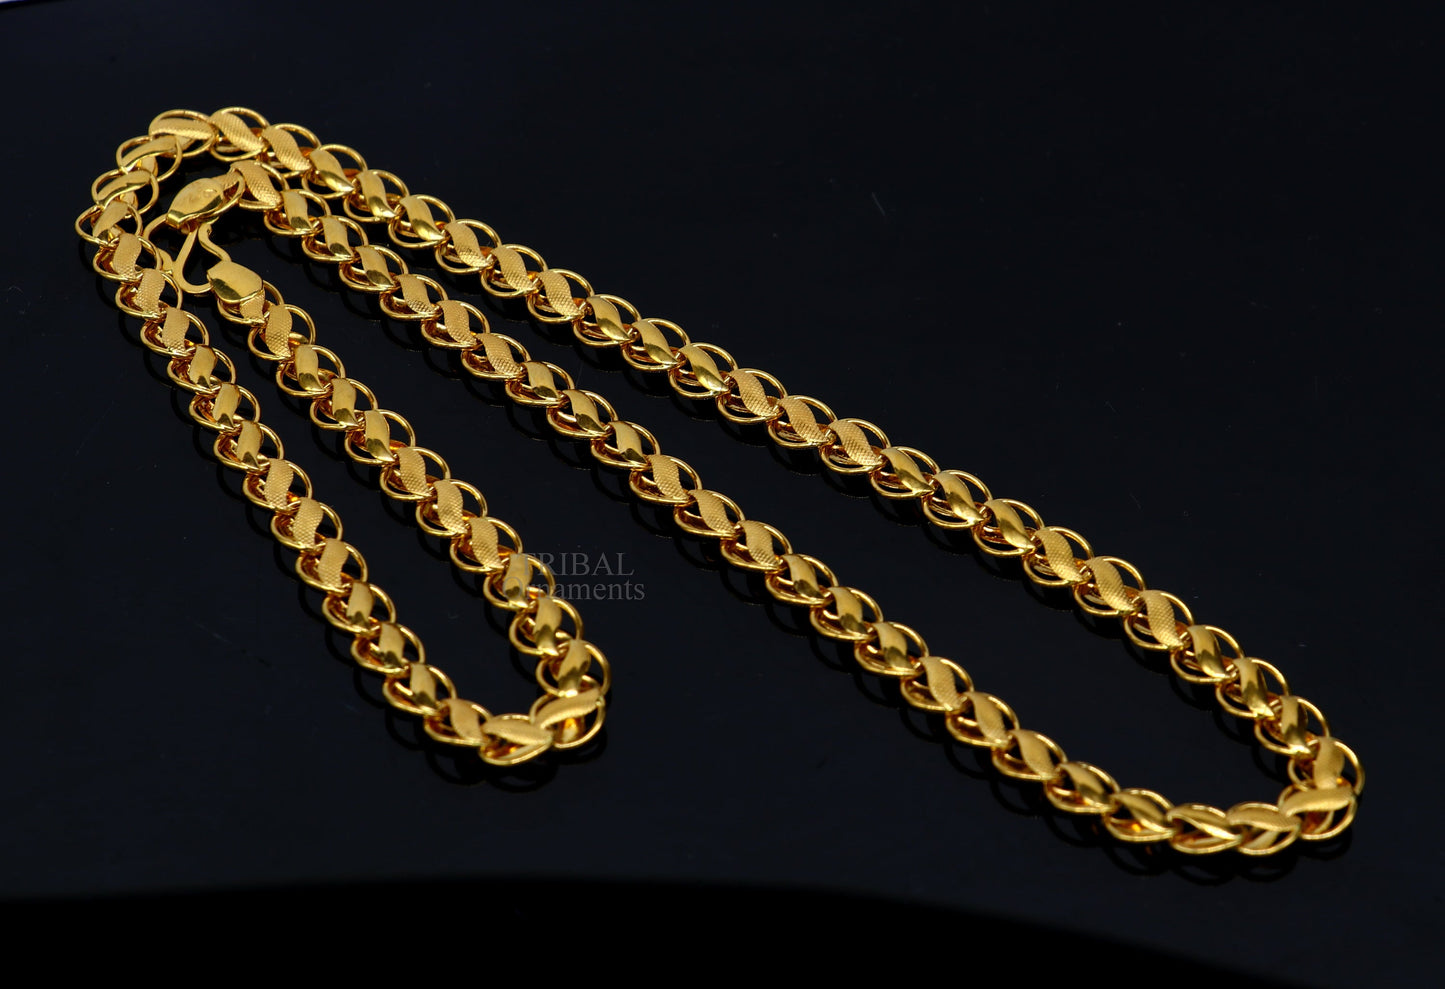 22k yellow gold handmade fabulous lotus chain necklace 18"- 24" customized hallmarked chain men's gifting jewelry wedding anniversary ch548 - TRIBAL ORNAMENTS